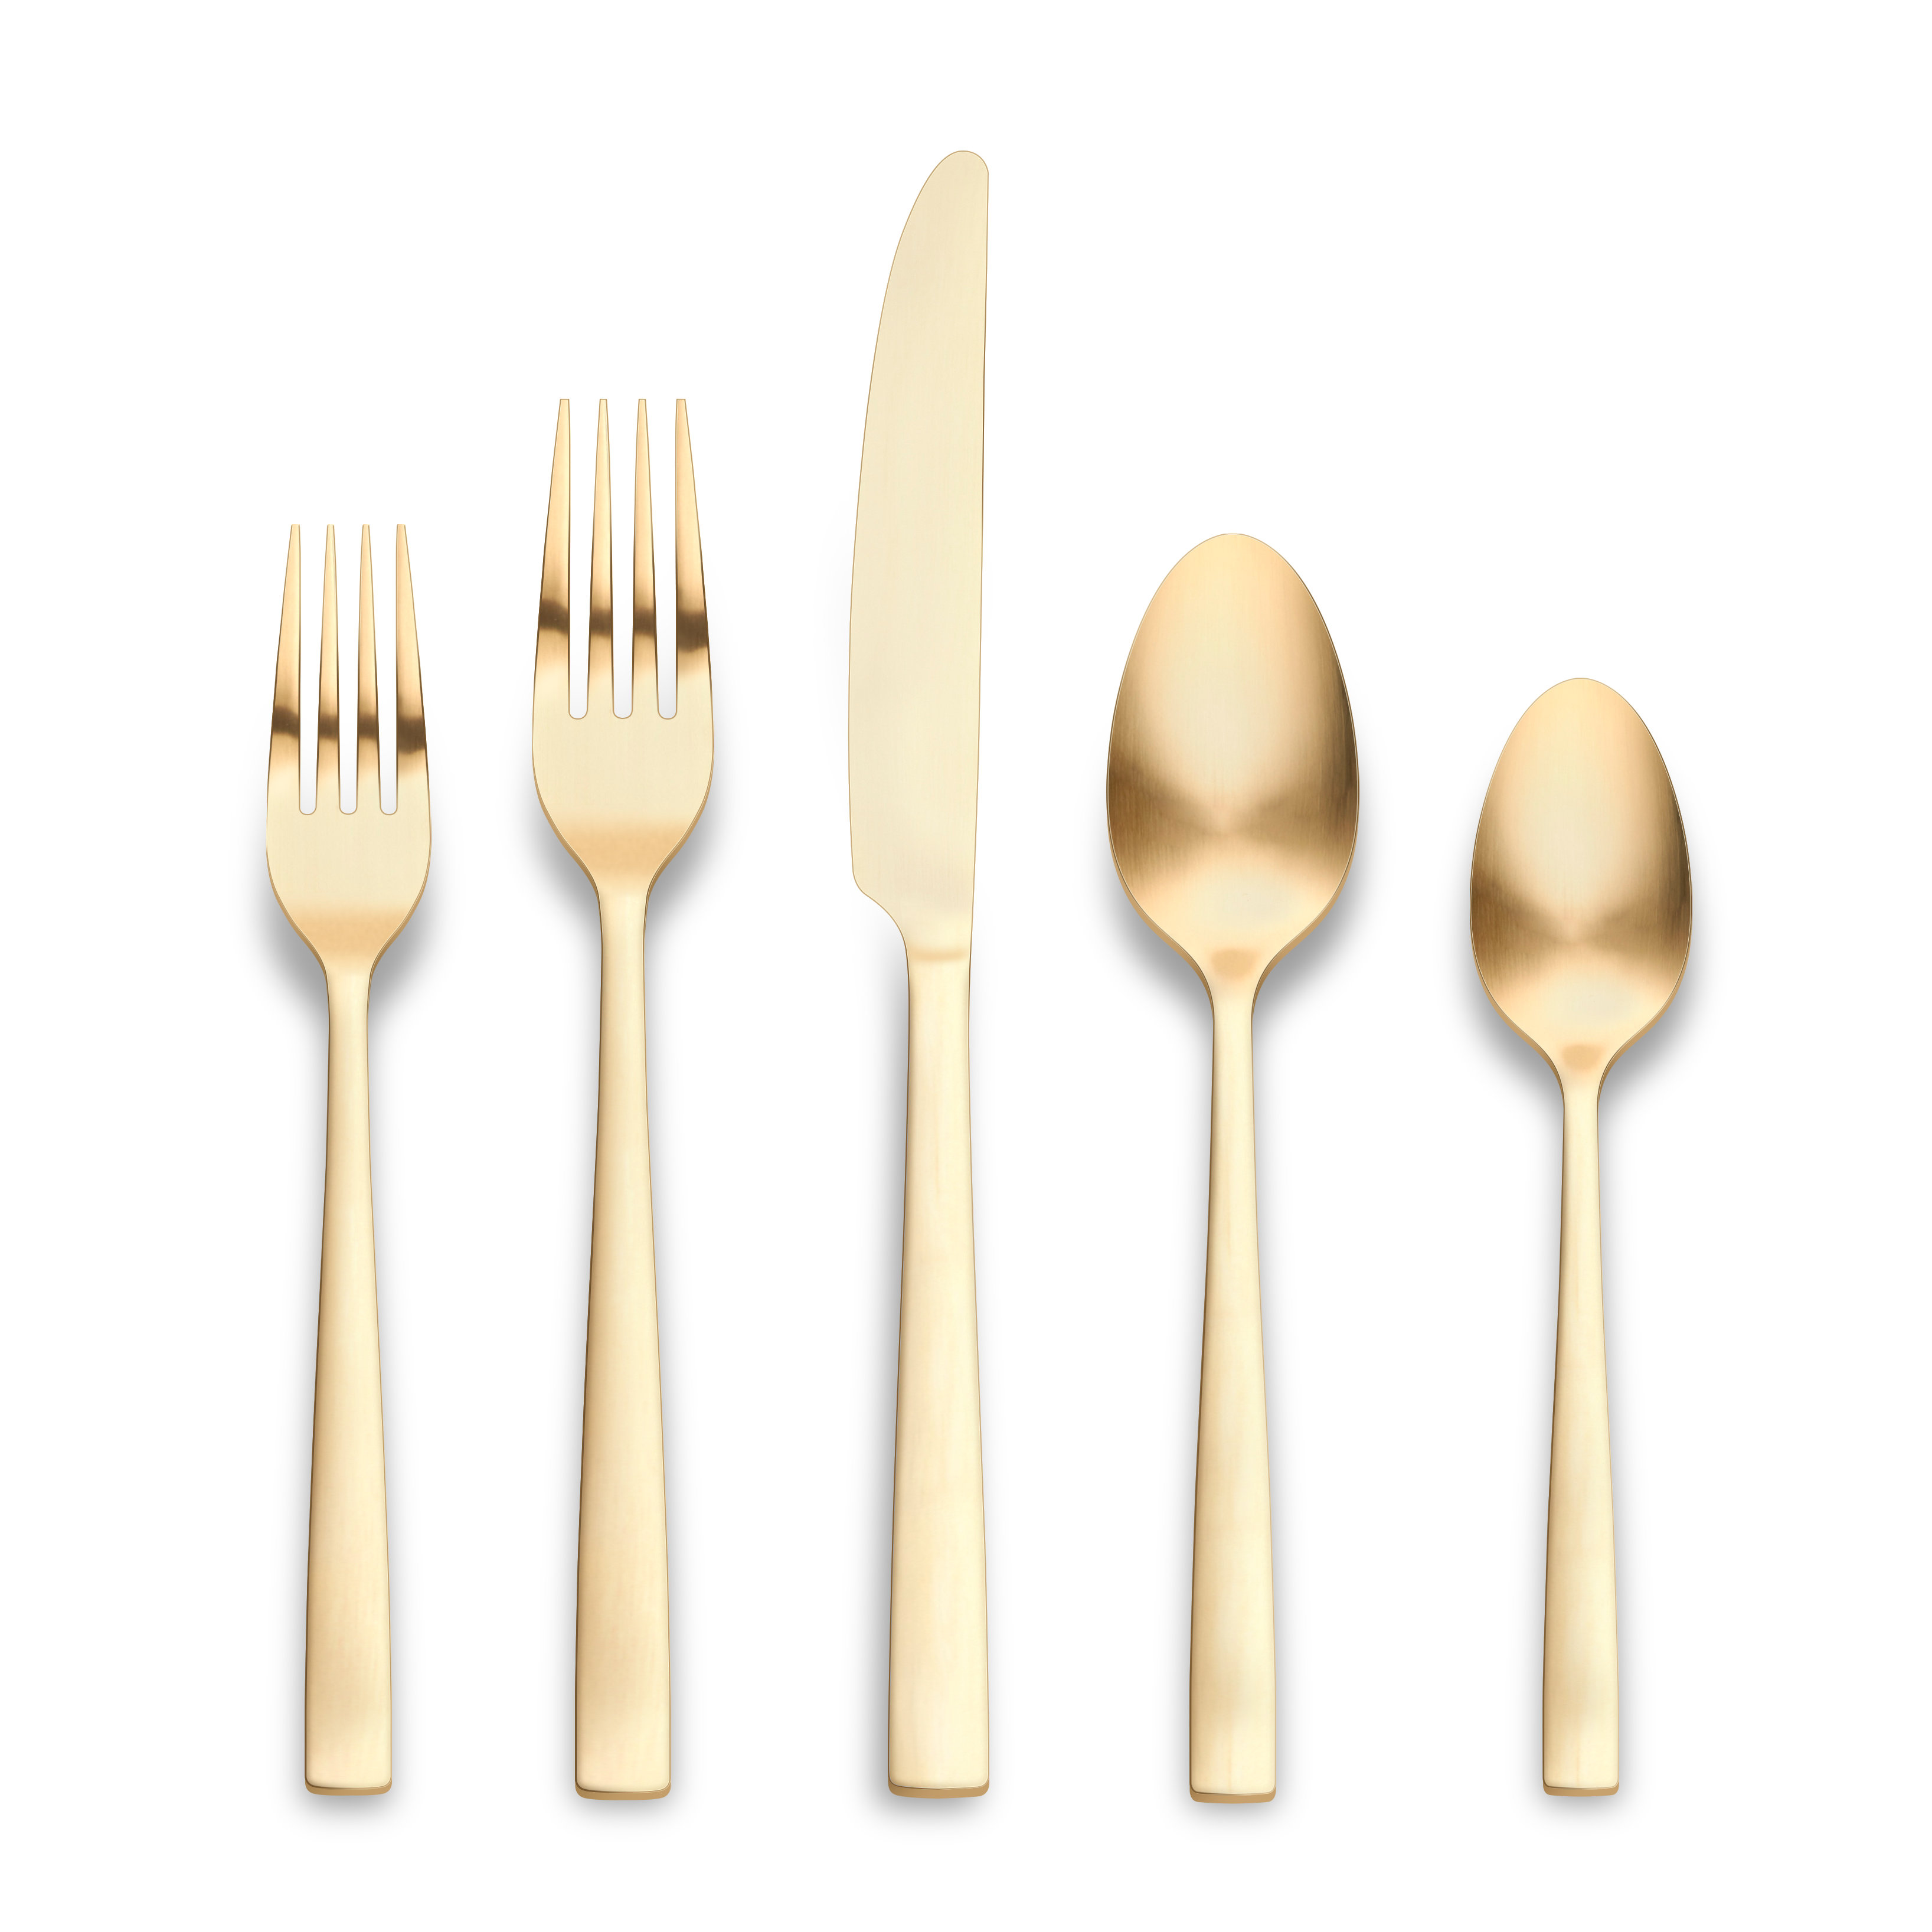 Luxury Style Stainless Steel Cutlery Set White & Gold Stainless